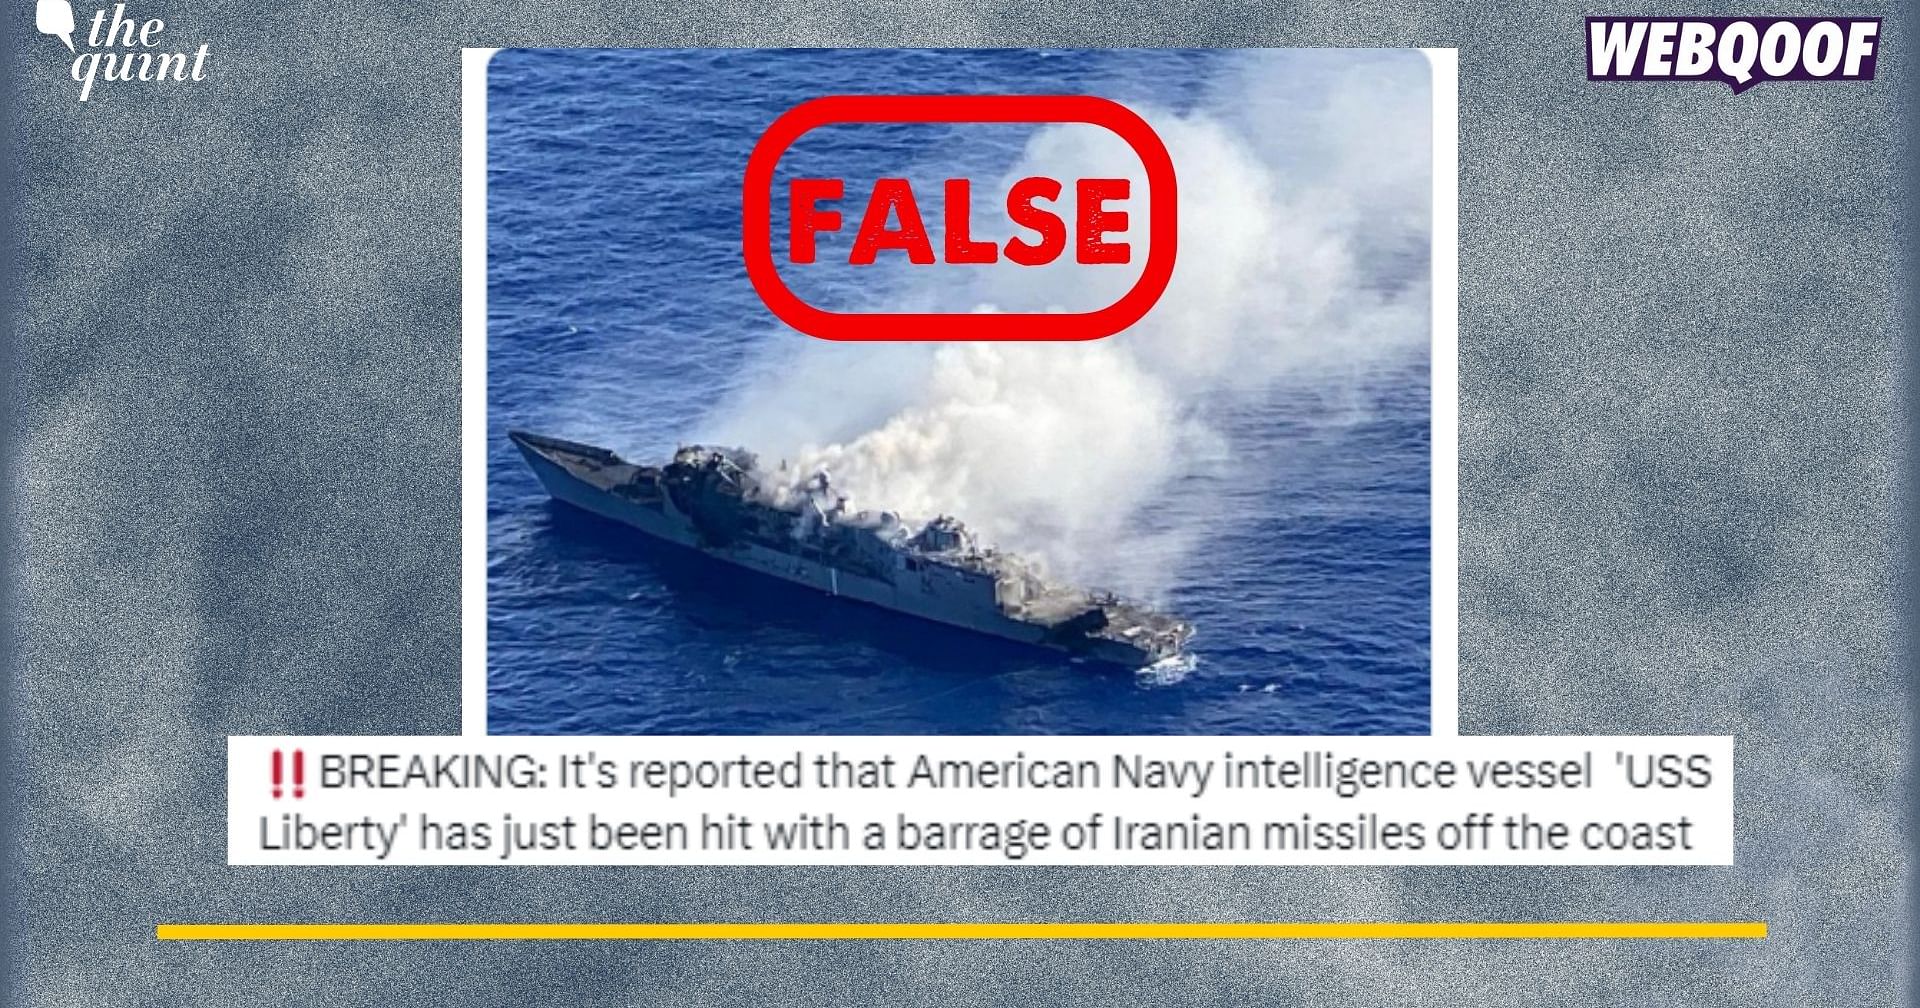 Old, Unrelated Image of USA Navy Vessel Shared with False Claim [Video]